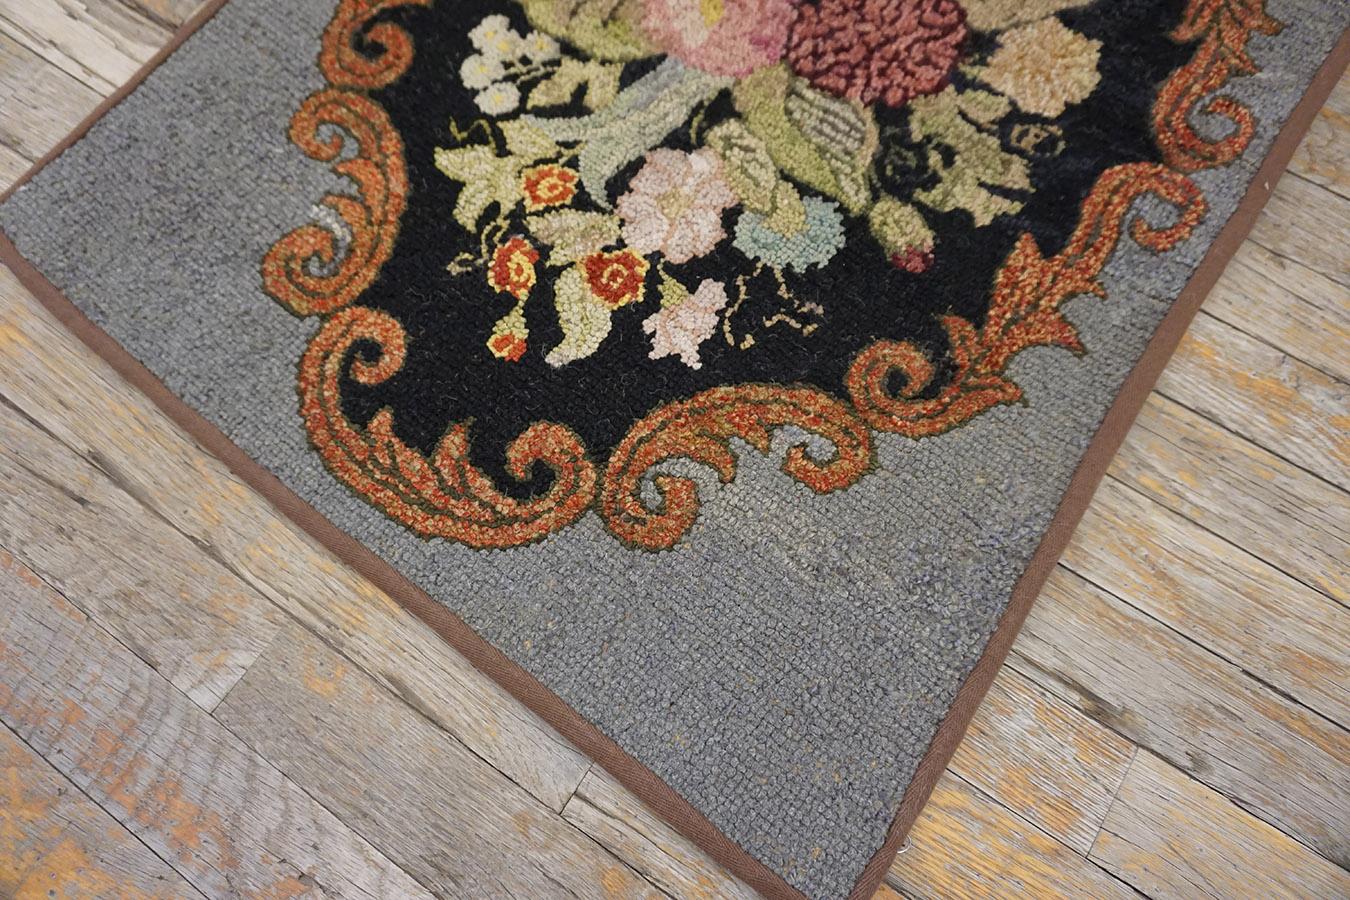 Mid-20th Century Early 20th Century American Hooked Rug ( 2' x 3' - 62 x 92 ) For Sale